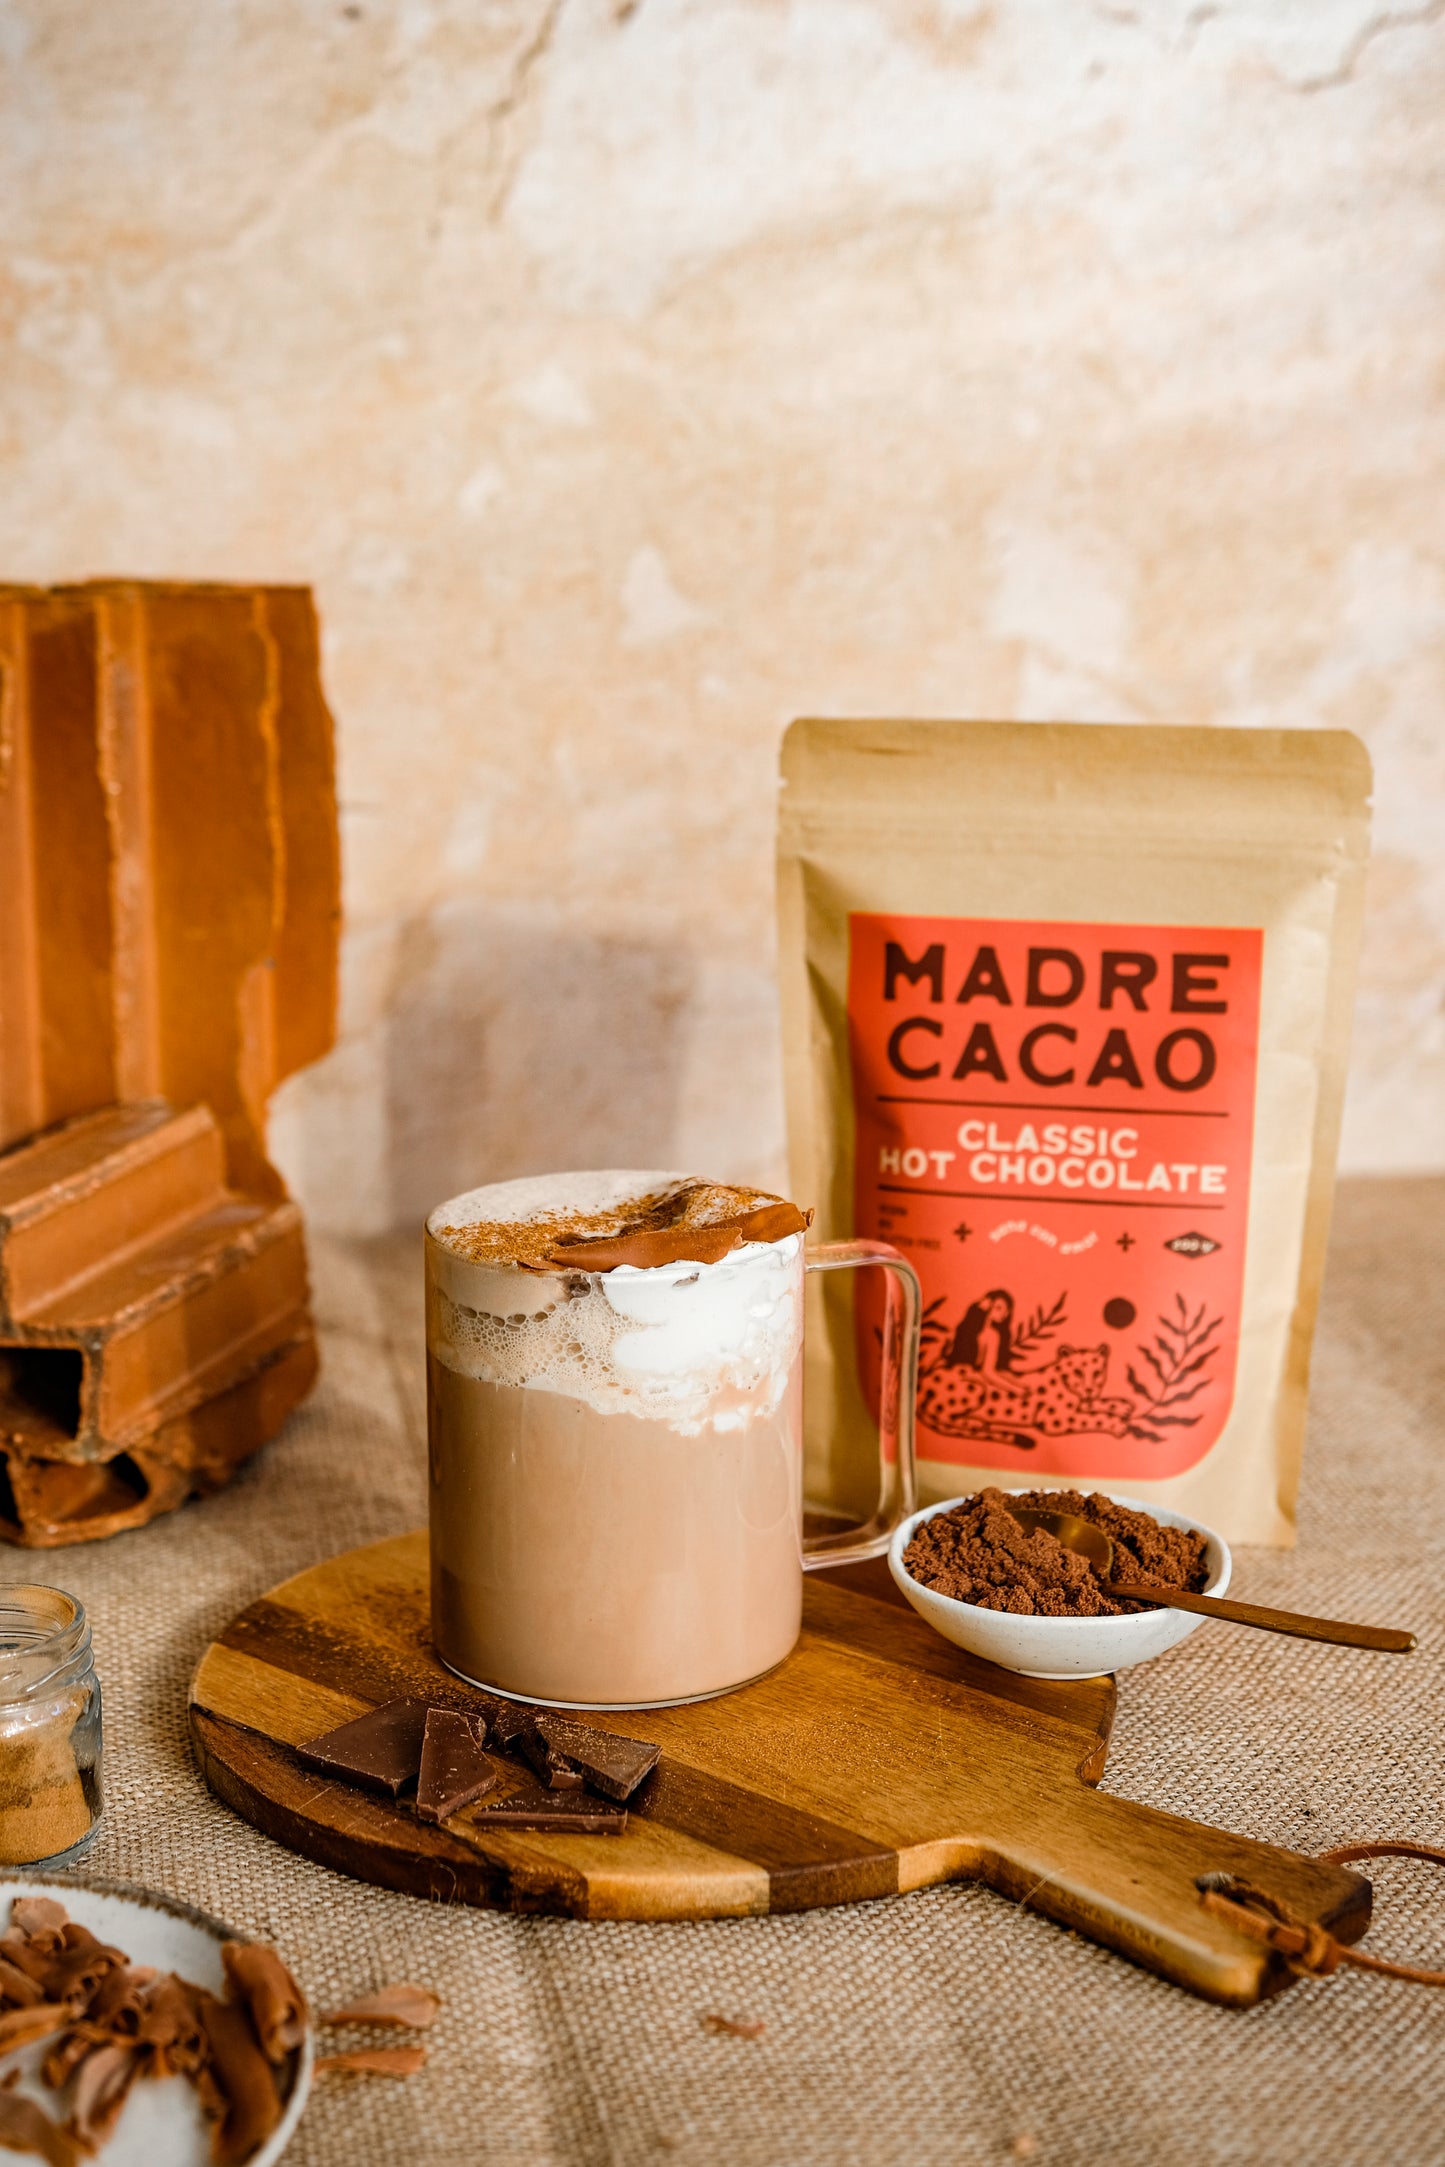 Hot chocolate Madre cacao 200gr